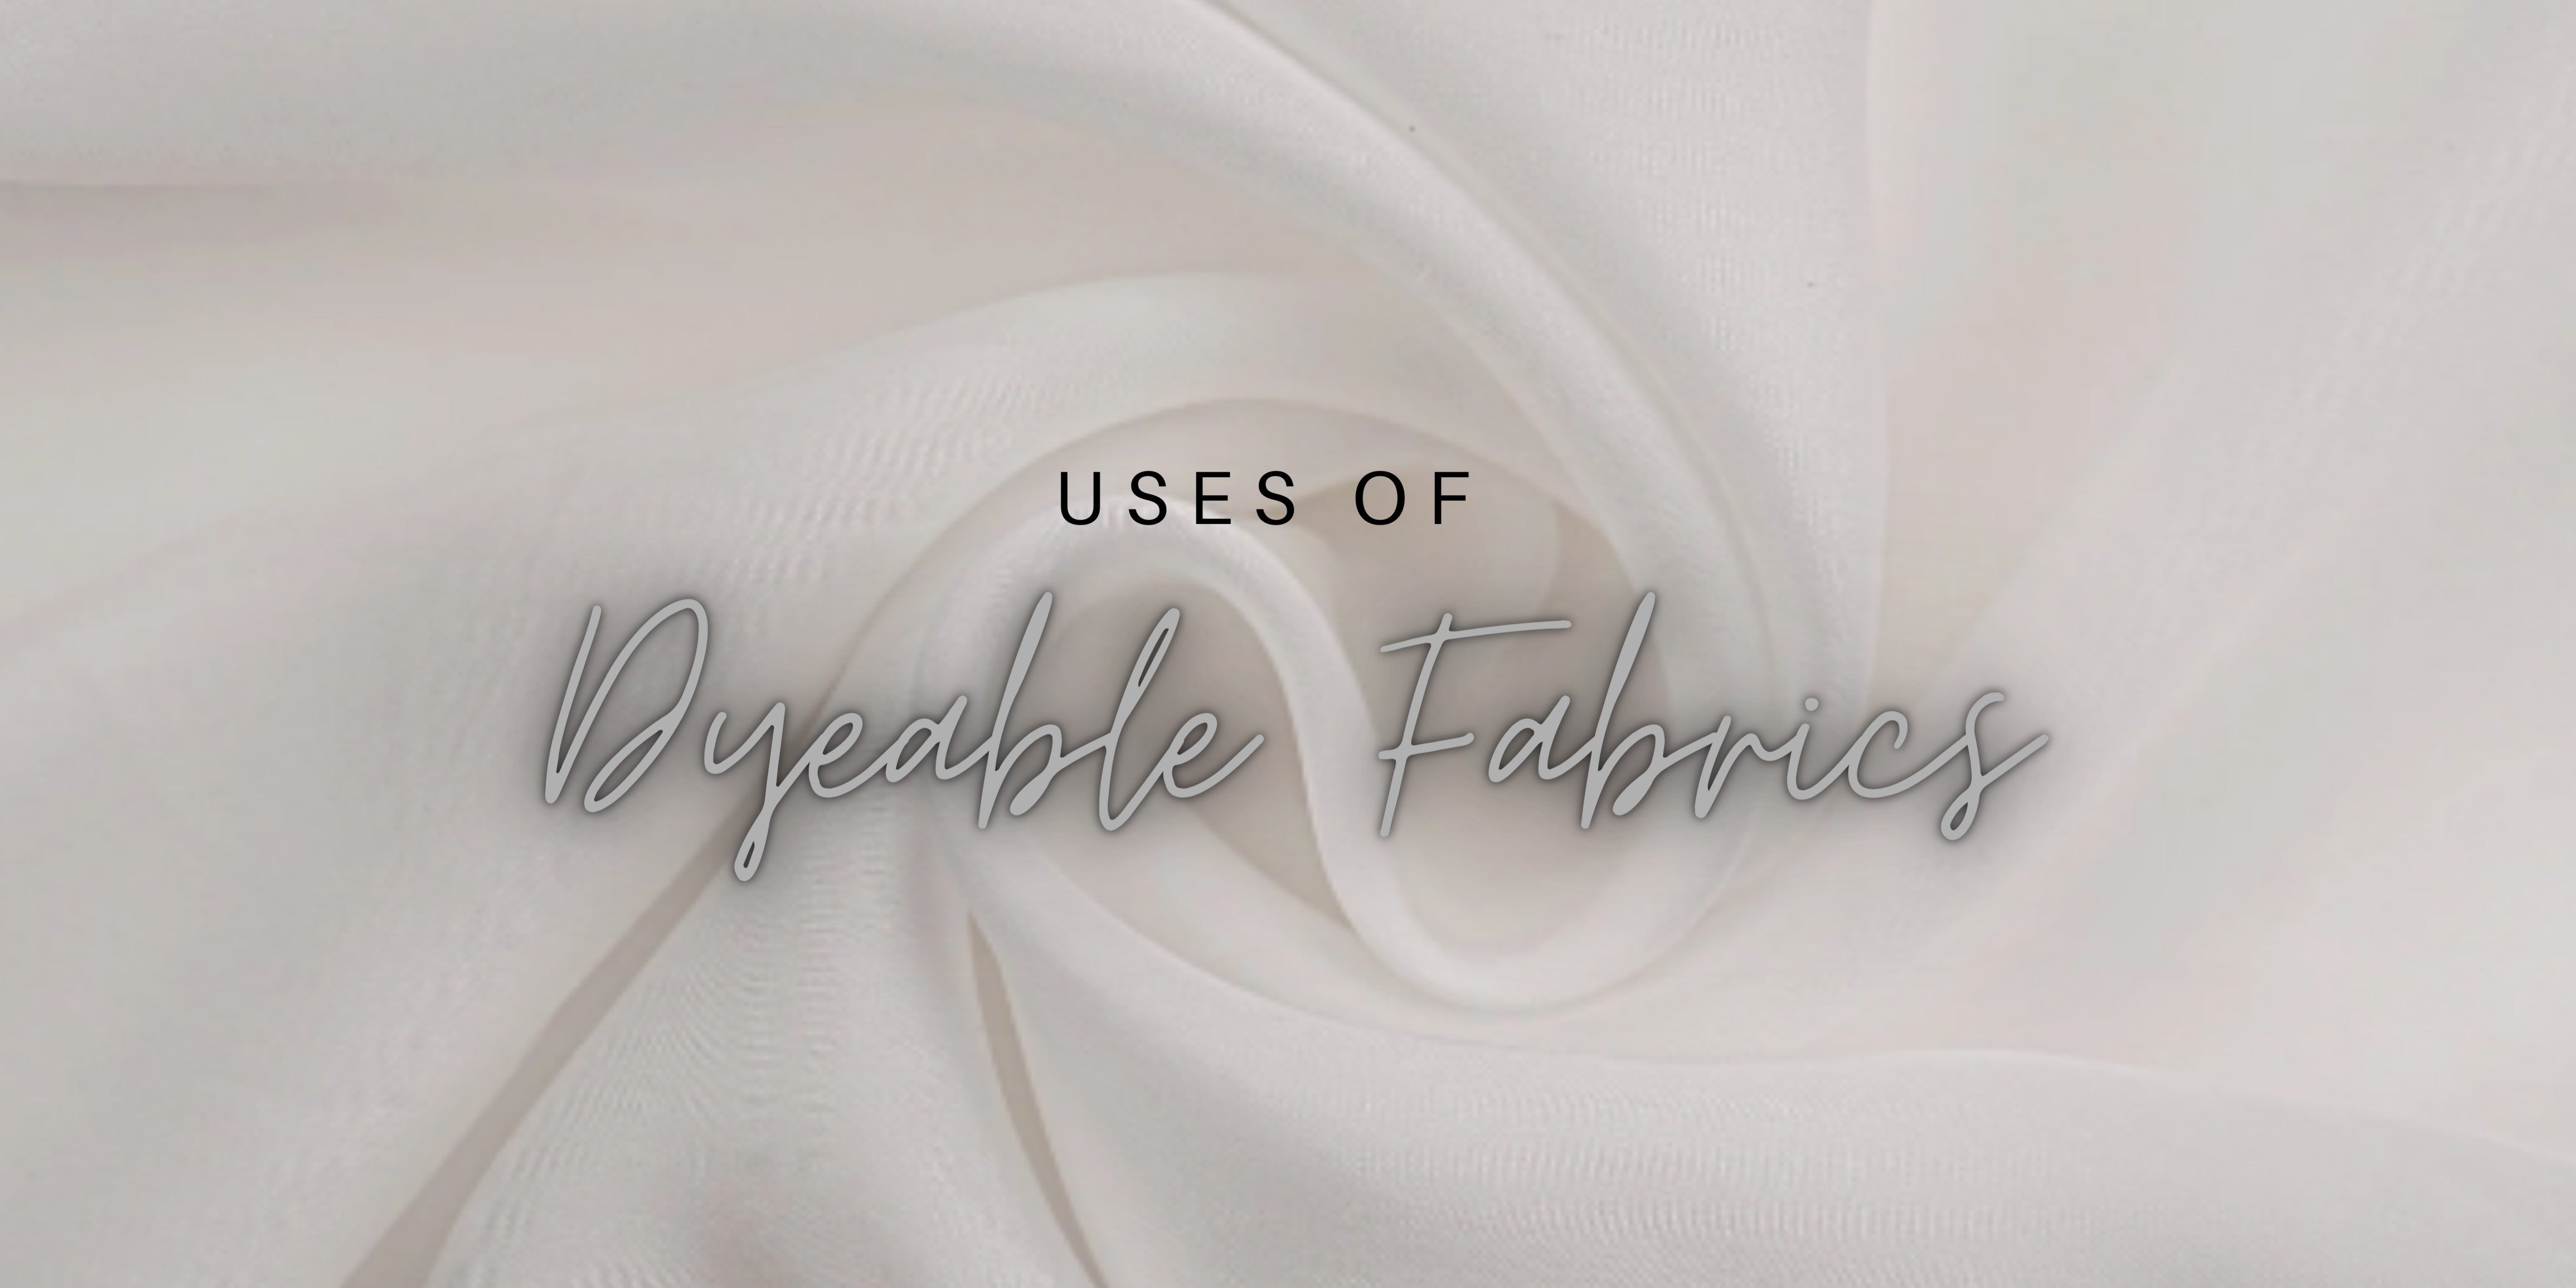 Why is Crepe Fabric a Go-to Choice for Every Fashionista? – Fabric Depot